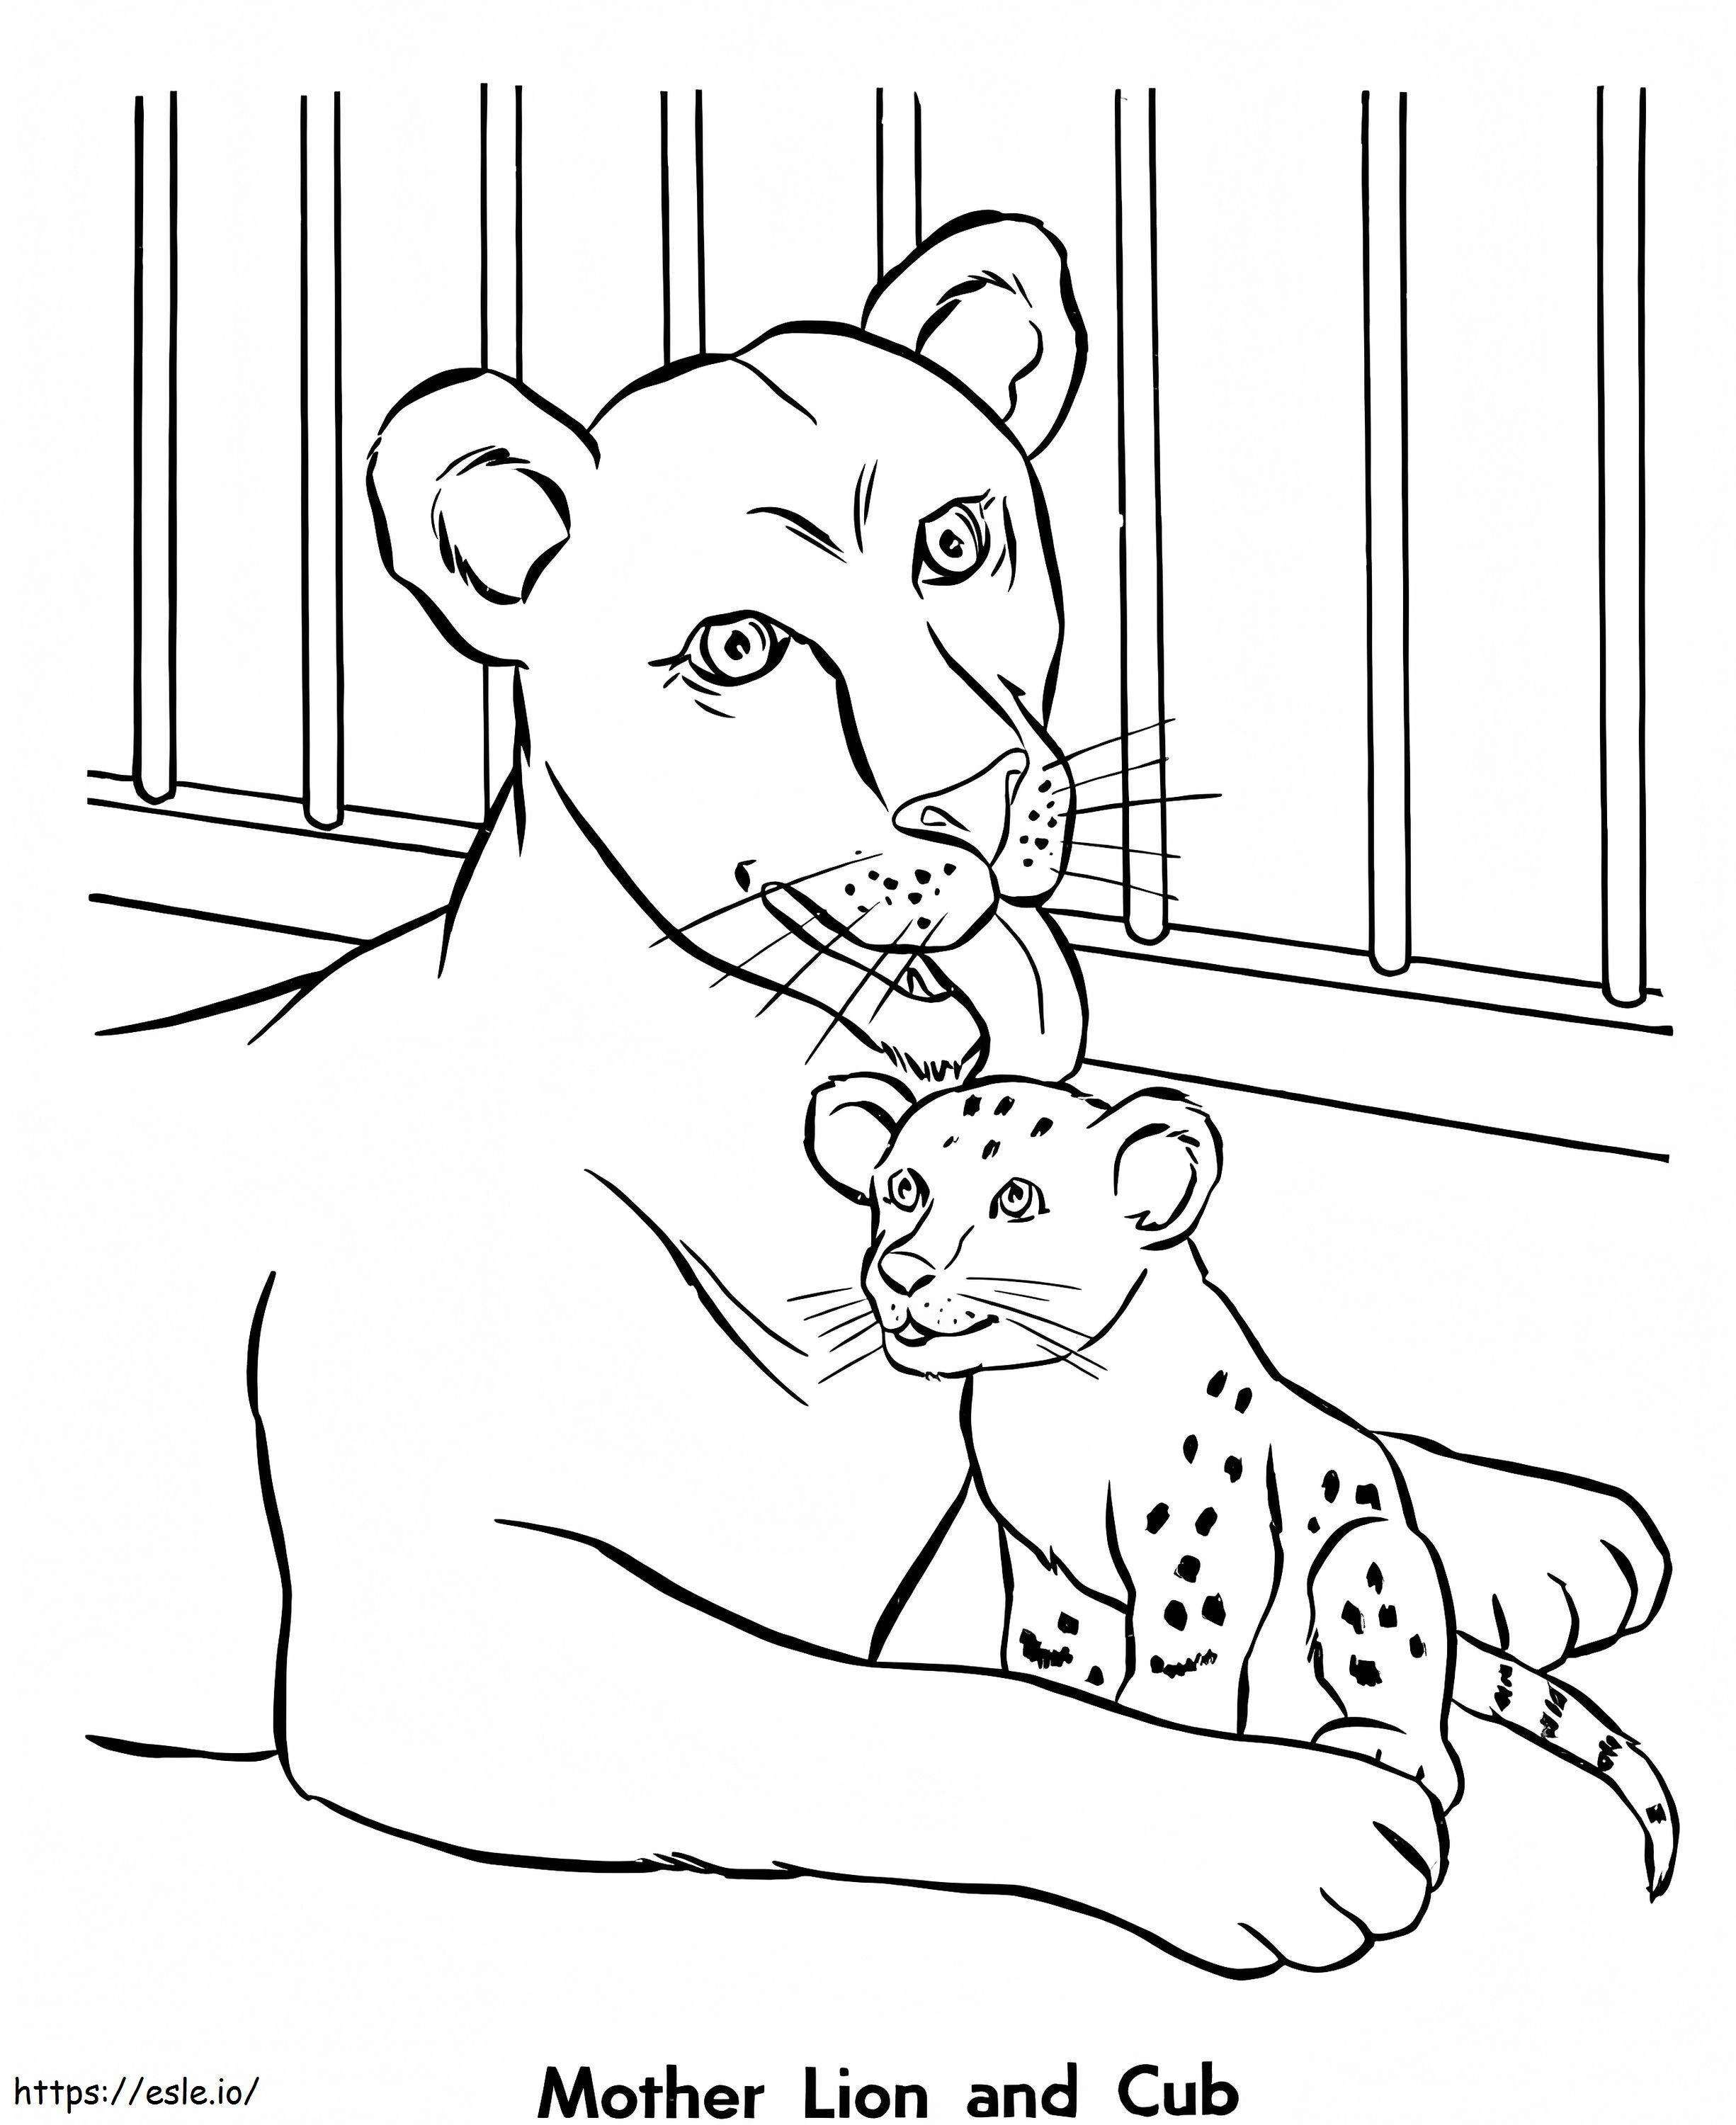 Mother Lion And Cub In A Zoo coloring page